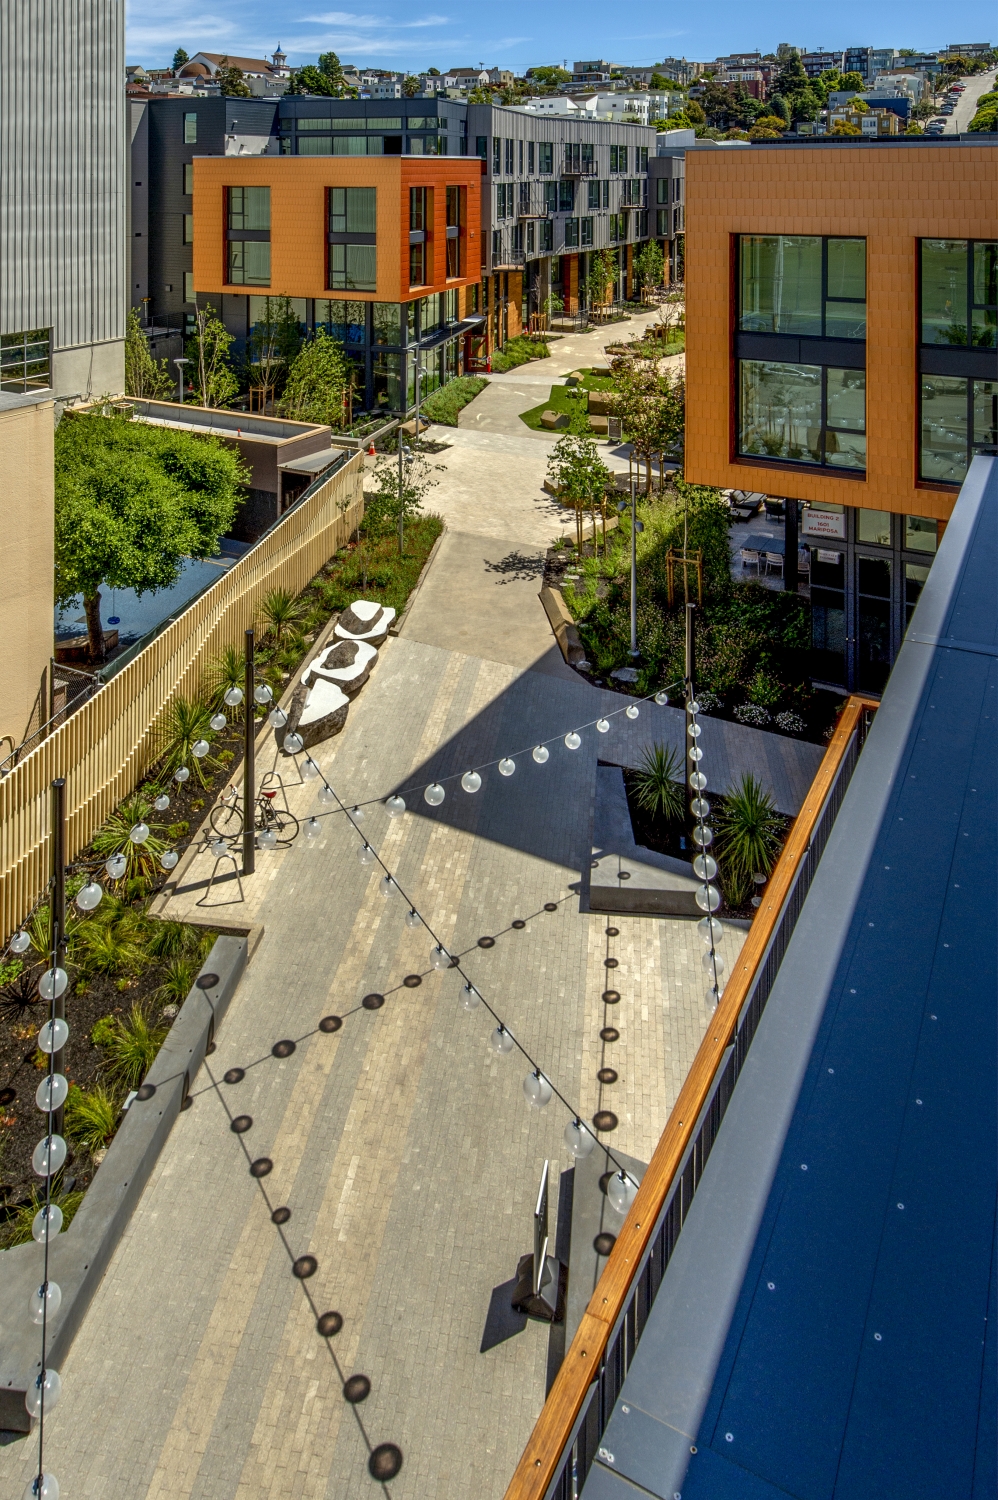 View of the pedestrian greenway from above at Mason on Mariposa in San Francisco.